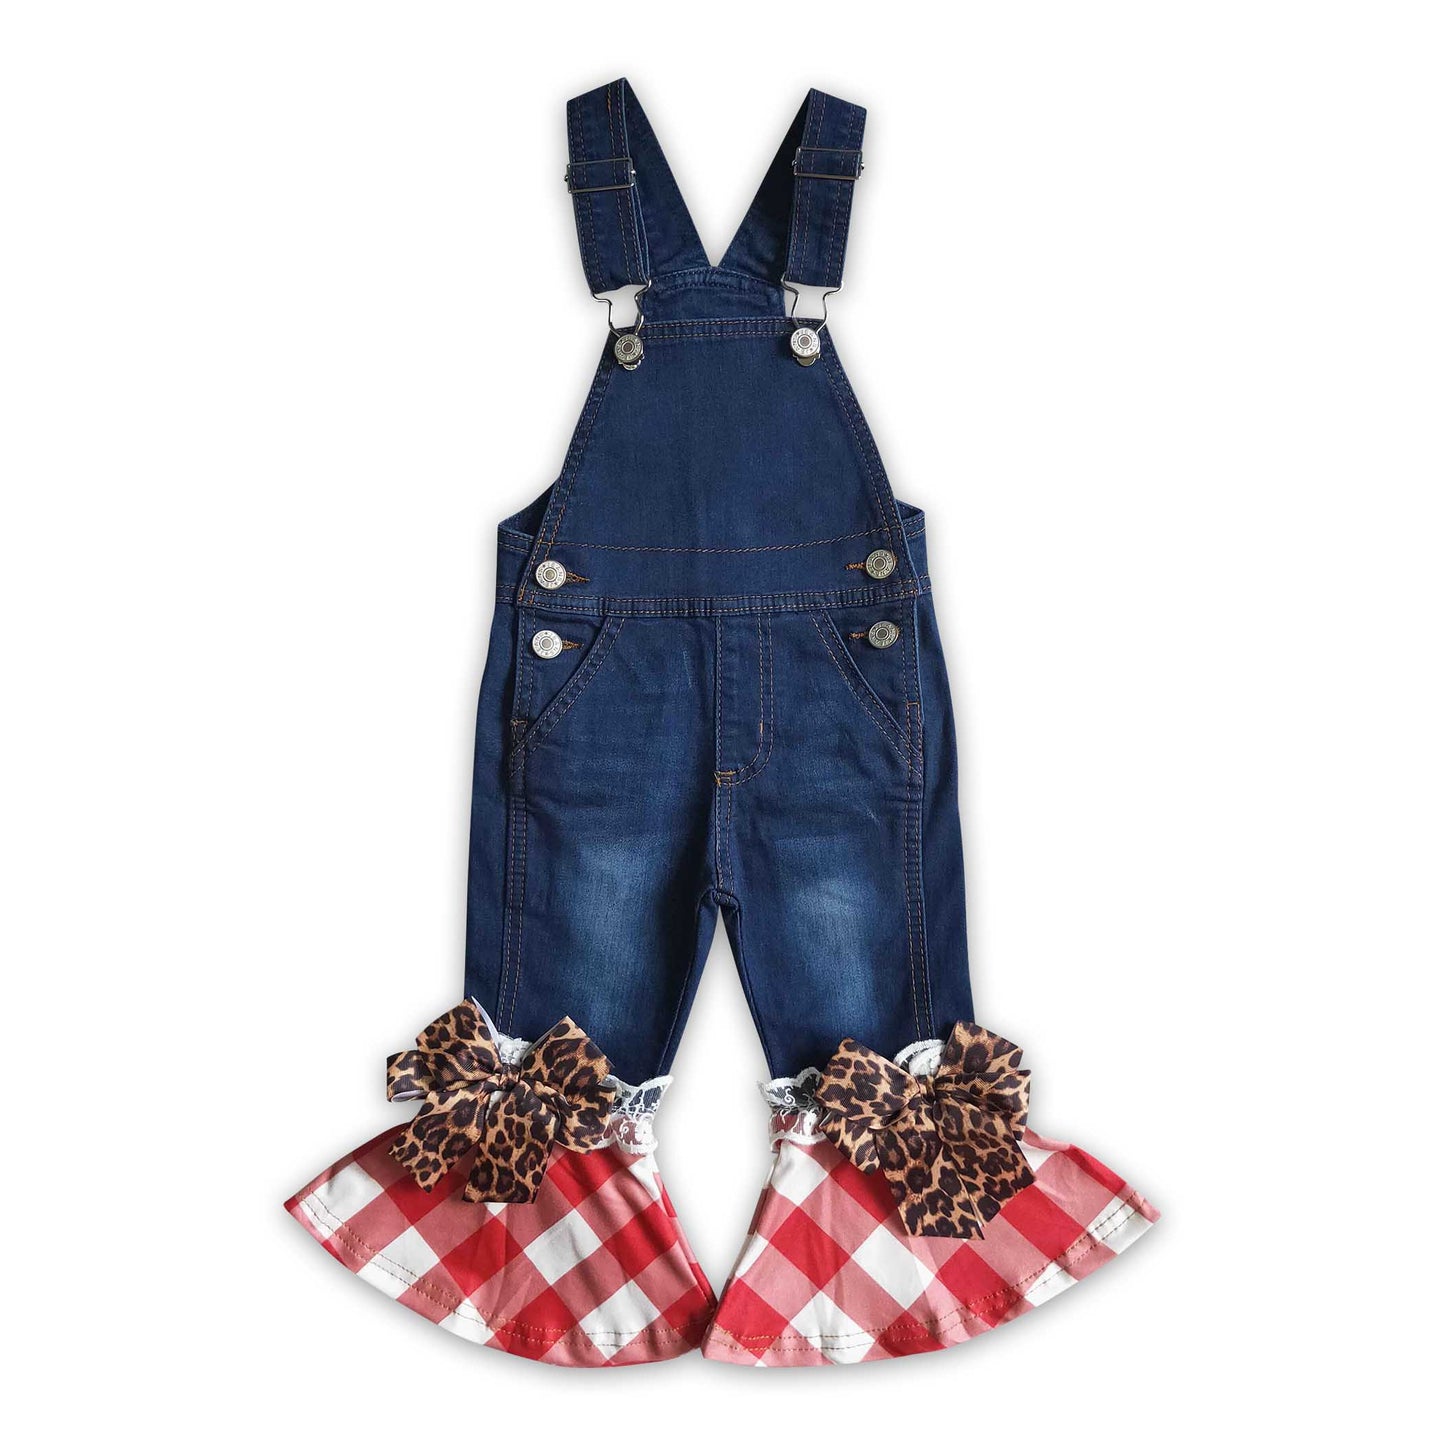 Leopard shirt red plaid denim overalls girls Christmas outfits